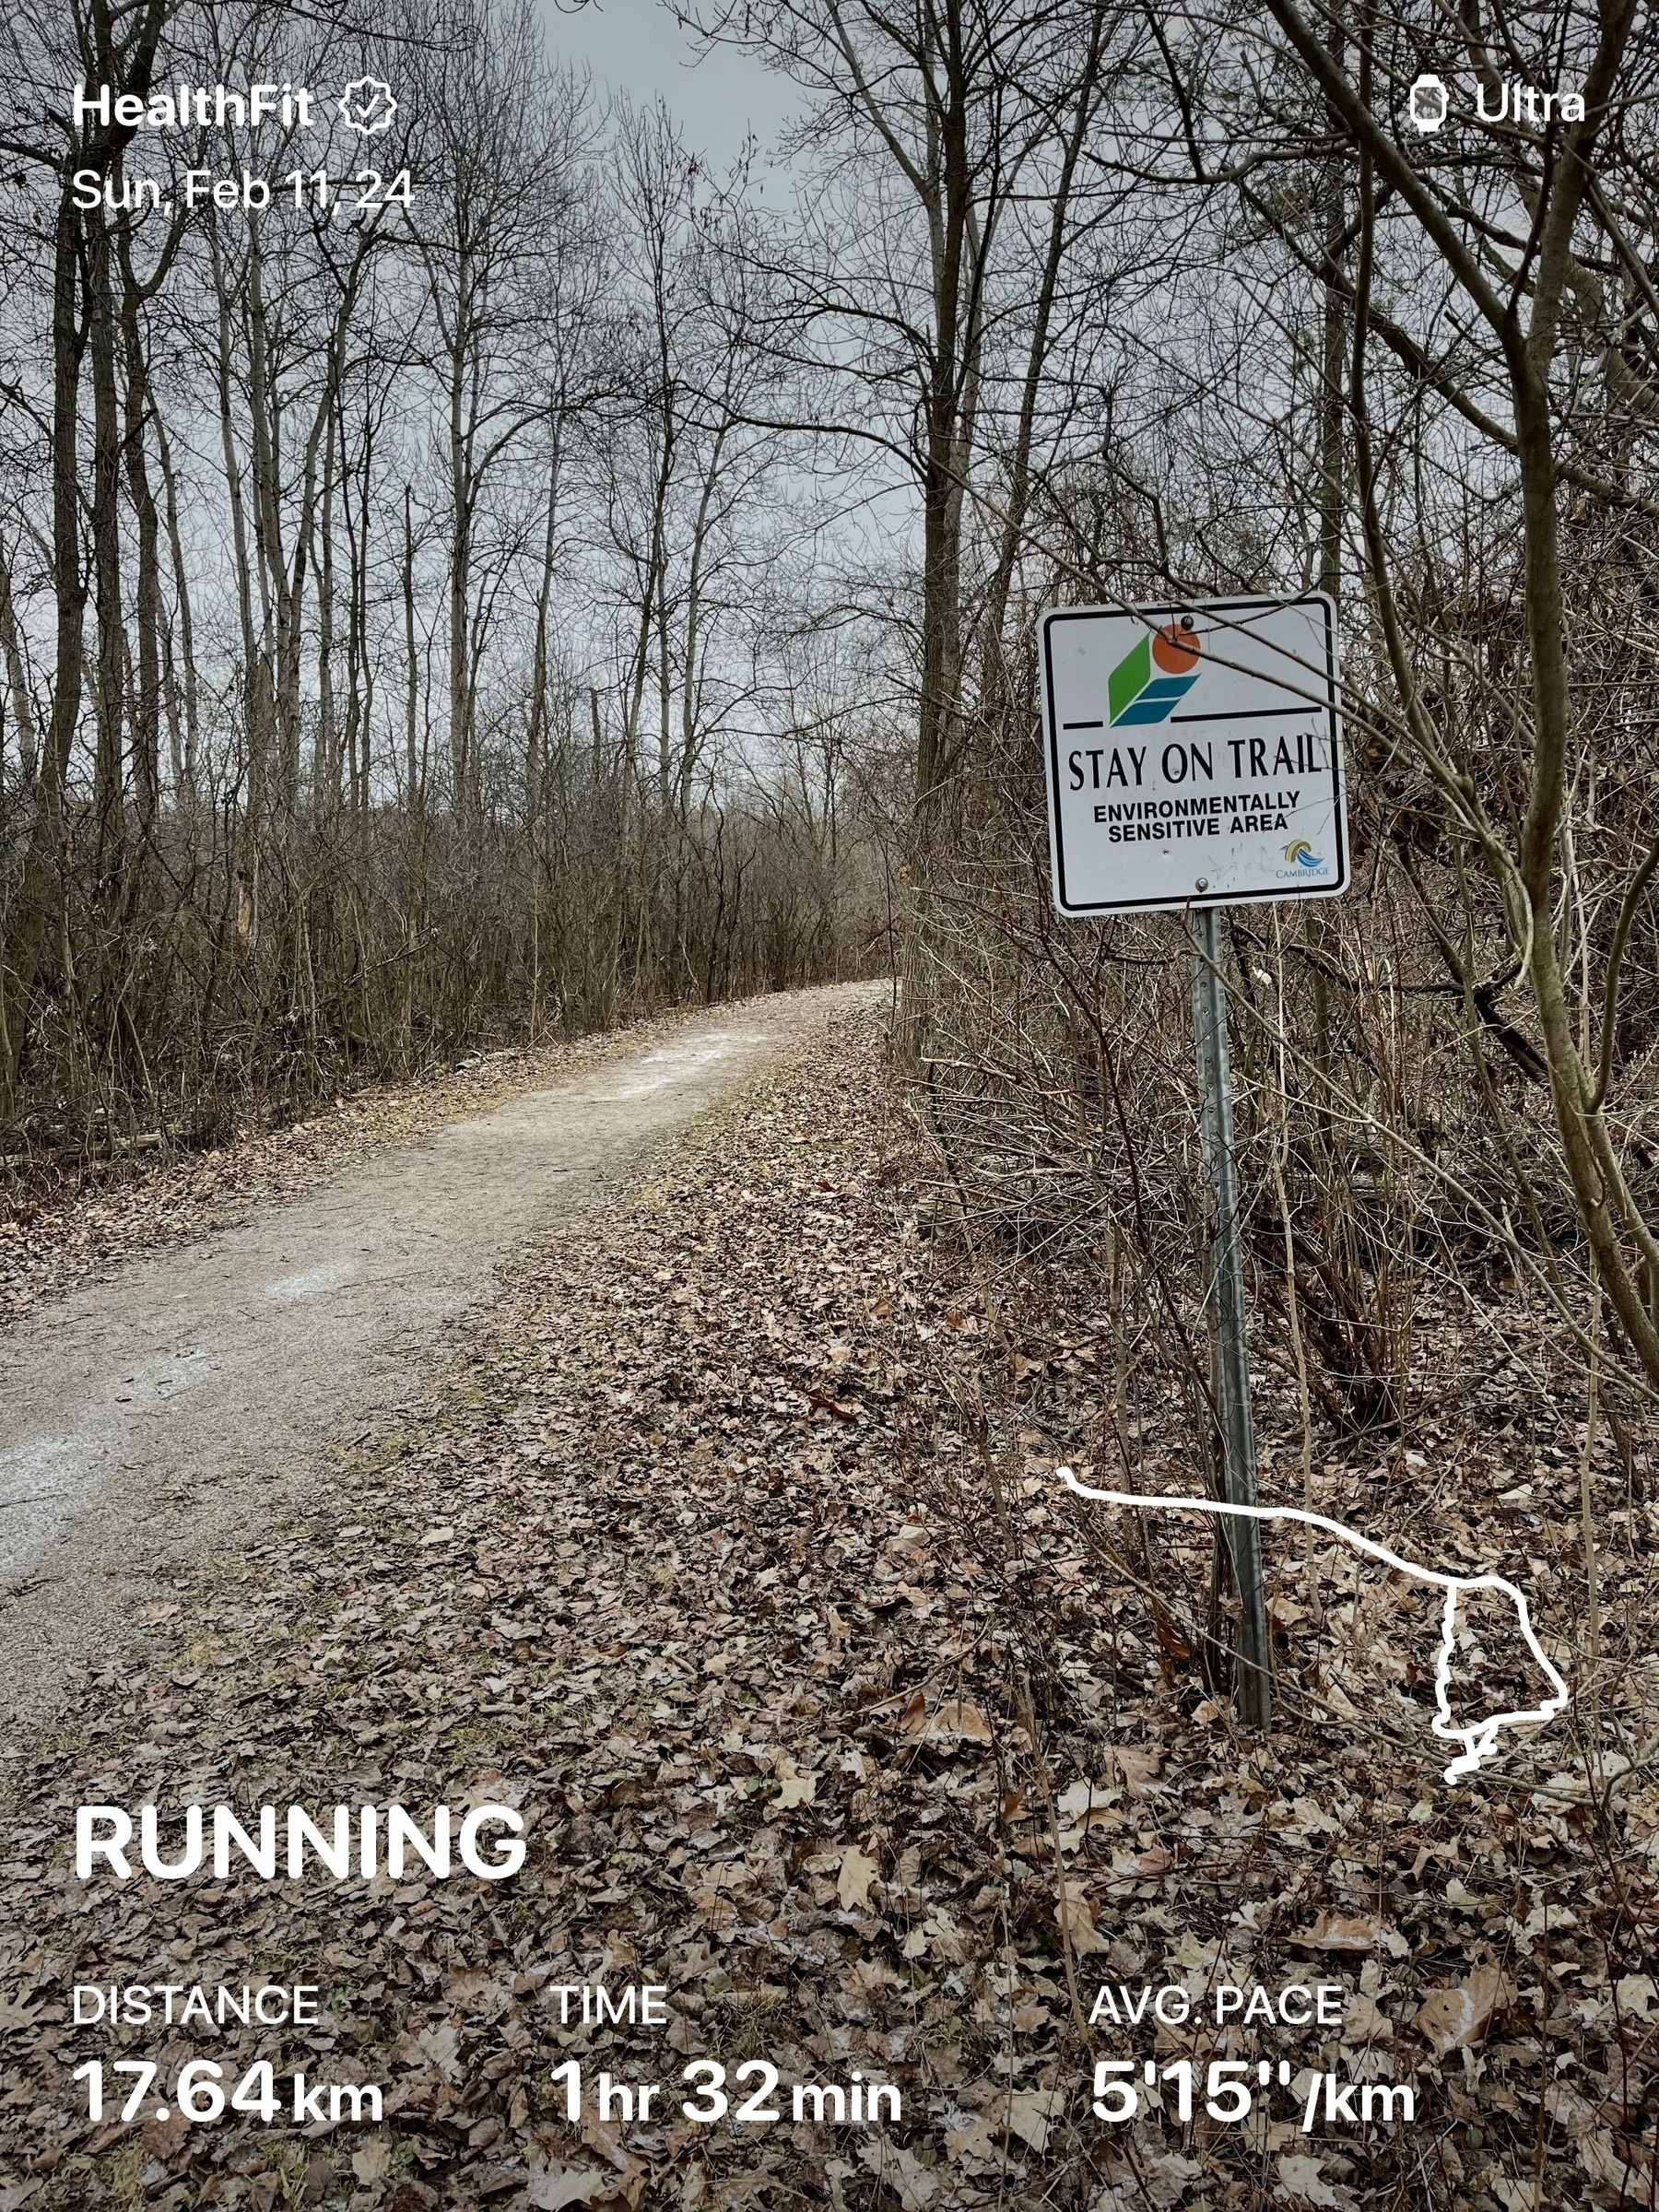 Trail through forest with a sign saying “Stay on trail” to the right. Run statistics overlaid: 17.64 km 1hr32min